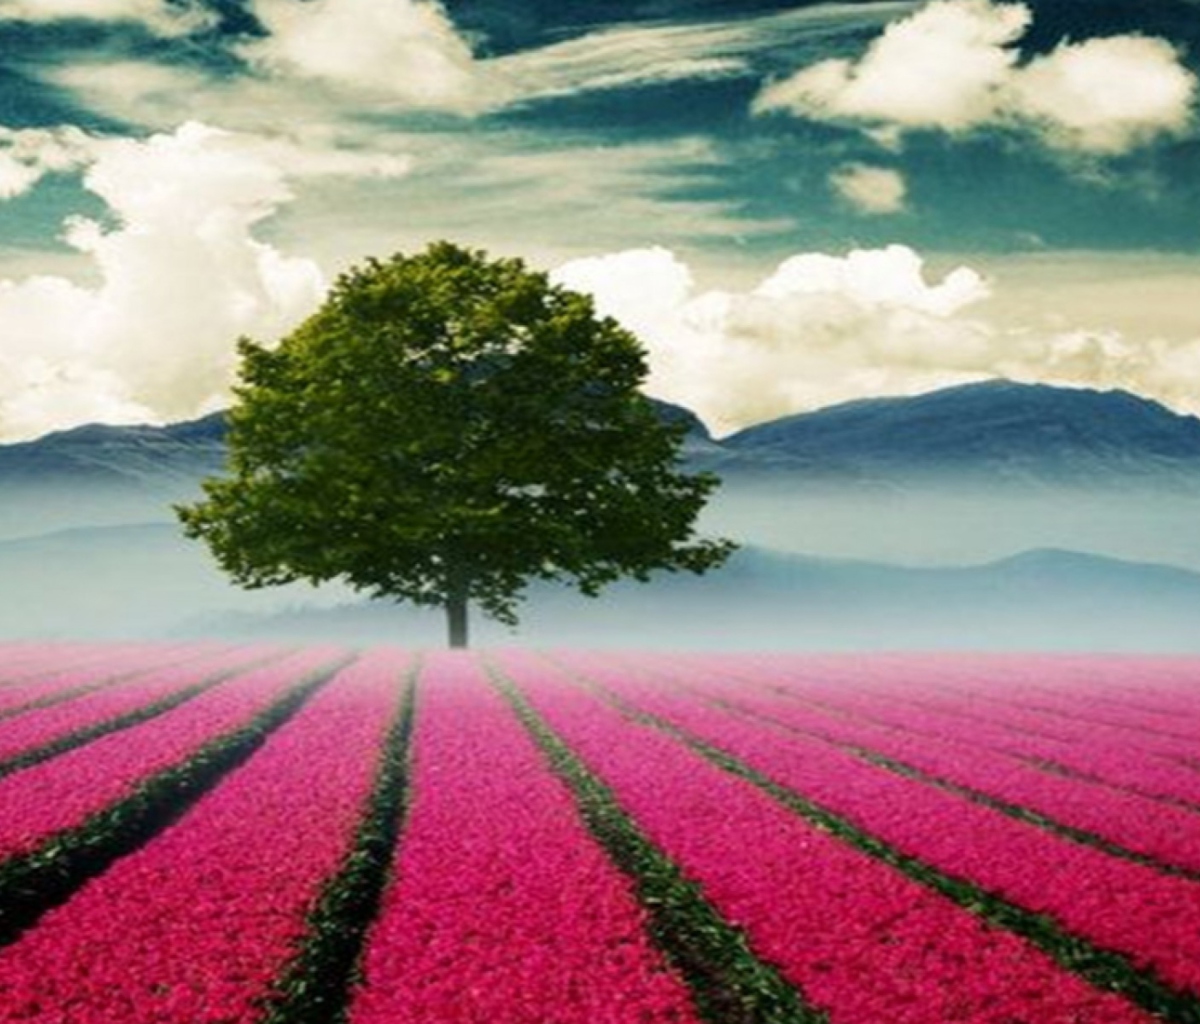 Beautiful Landscape With Tree And Pink Flower Field screenshot #1 1200x1024